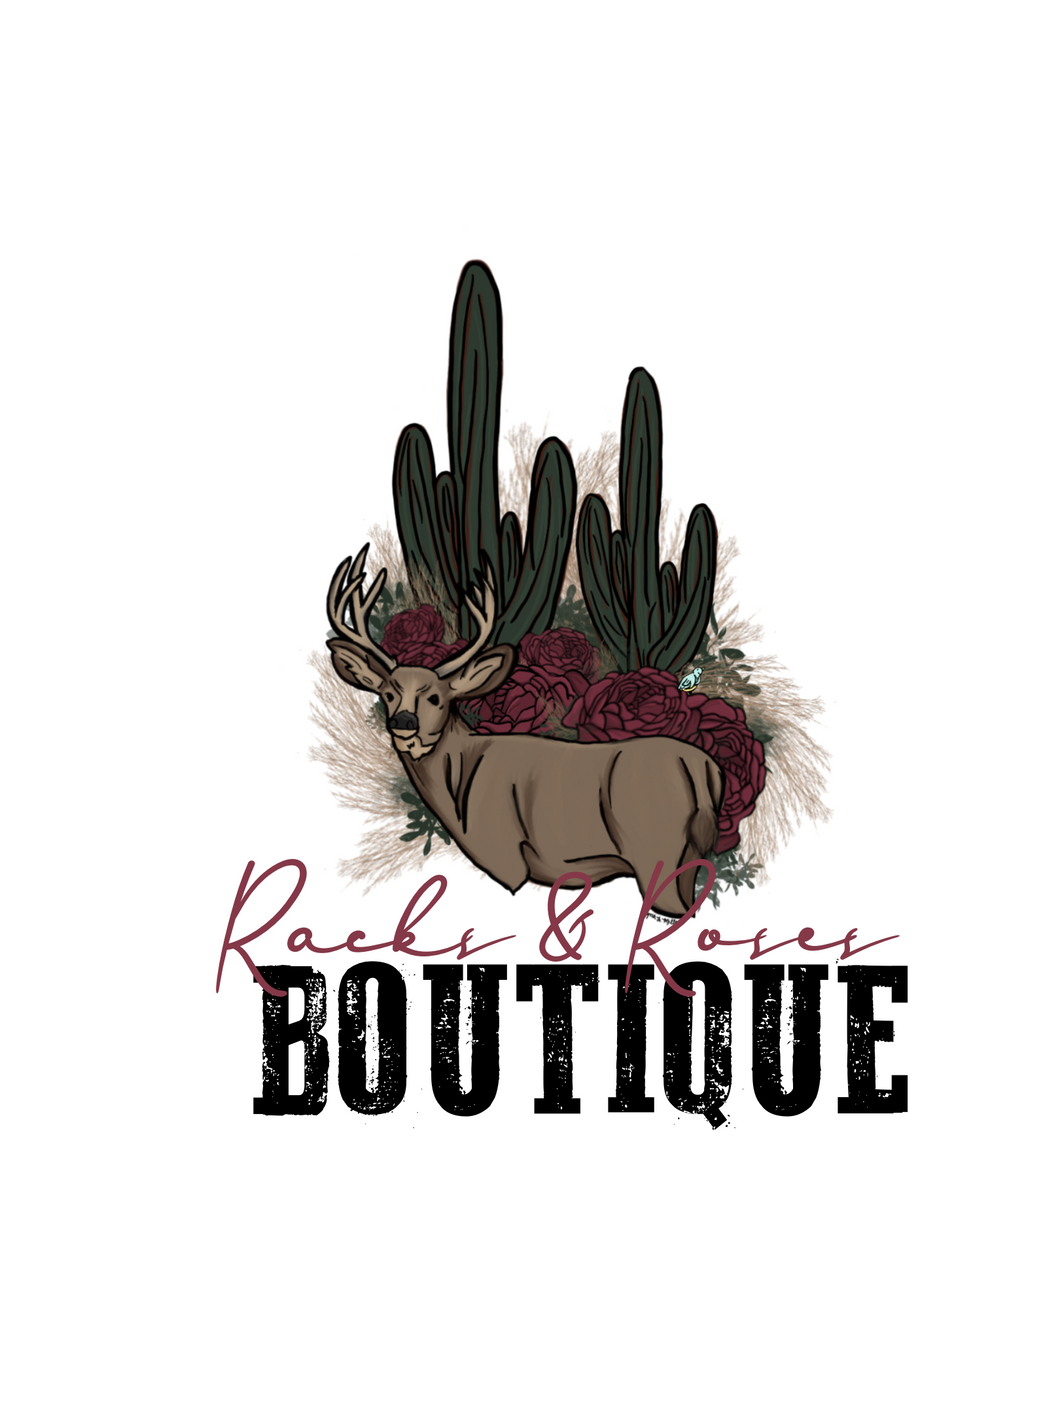 Racks & Roses Boutique Gift Card